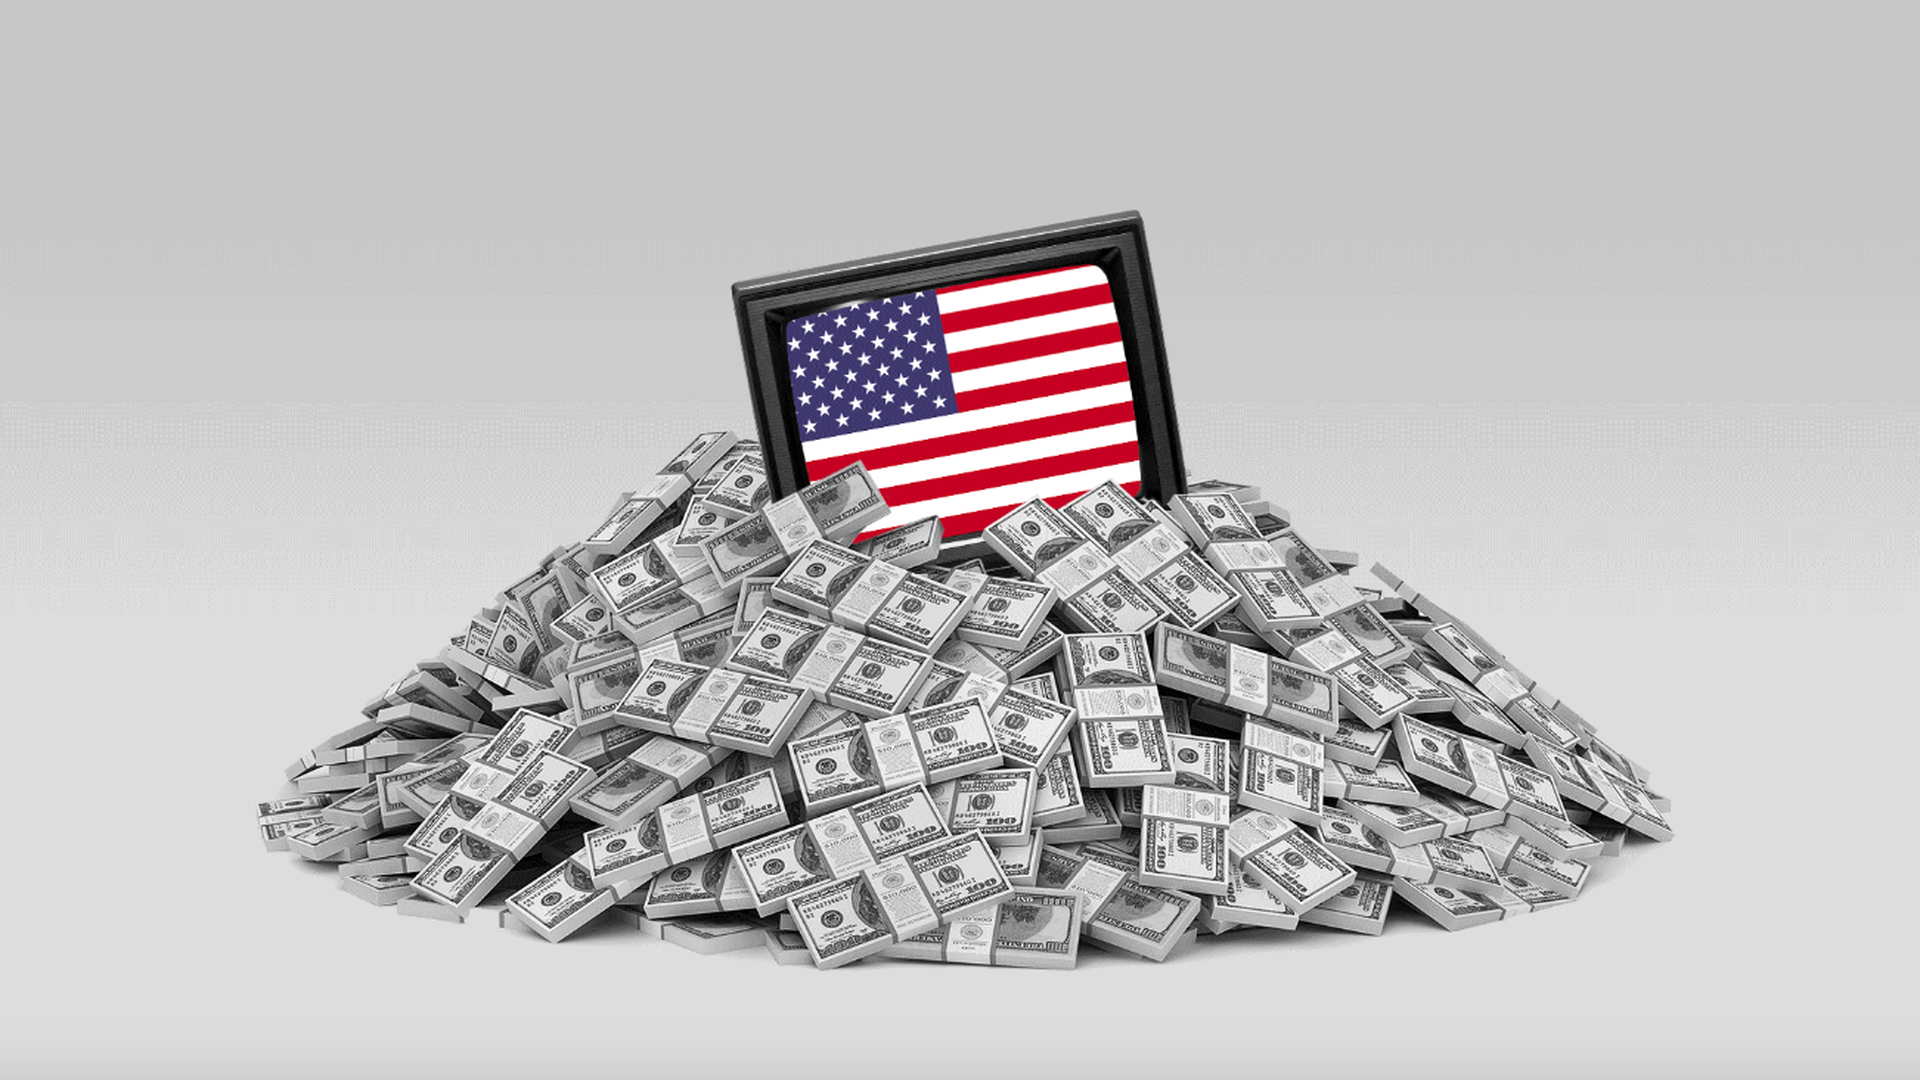 TV with american flag on a pile of money